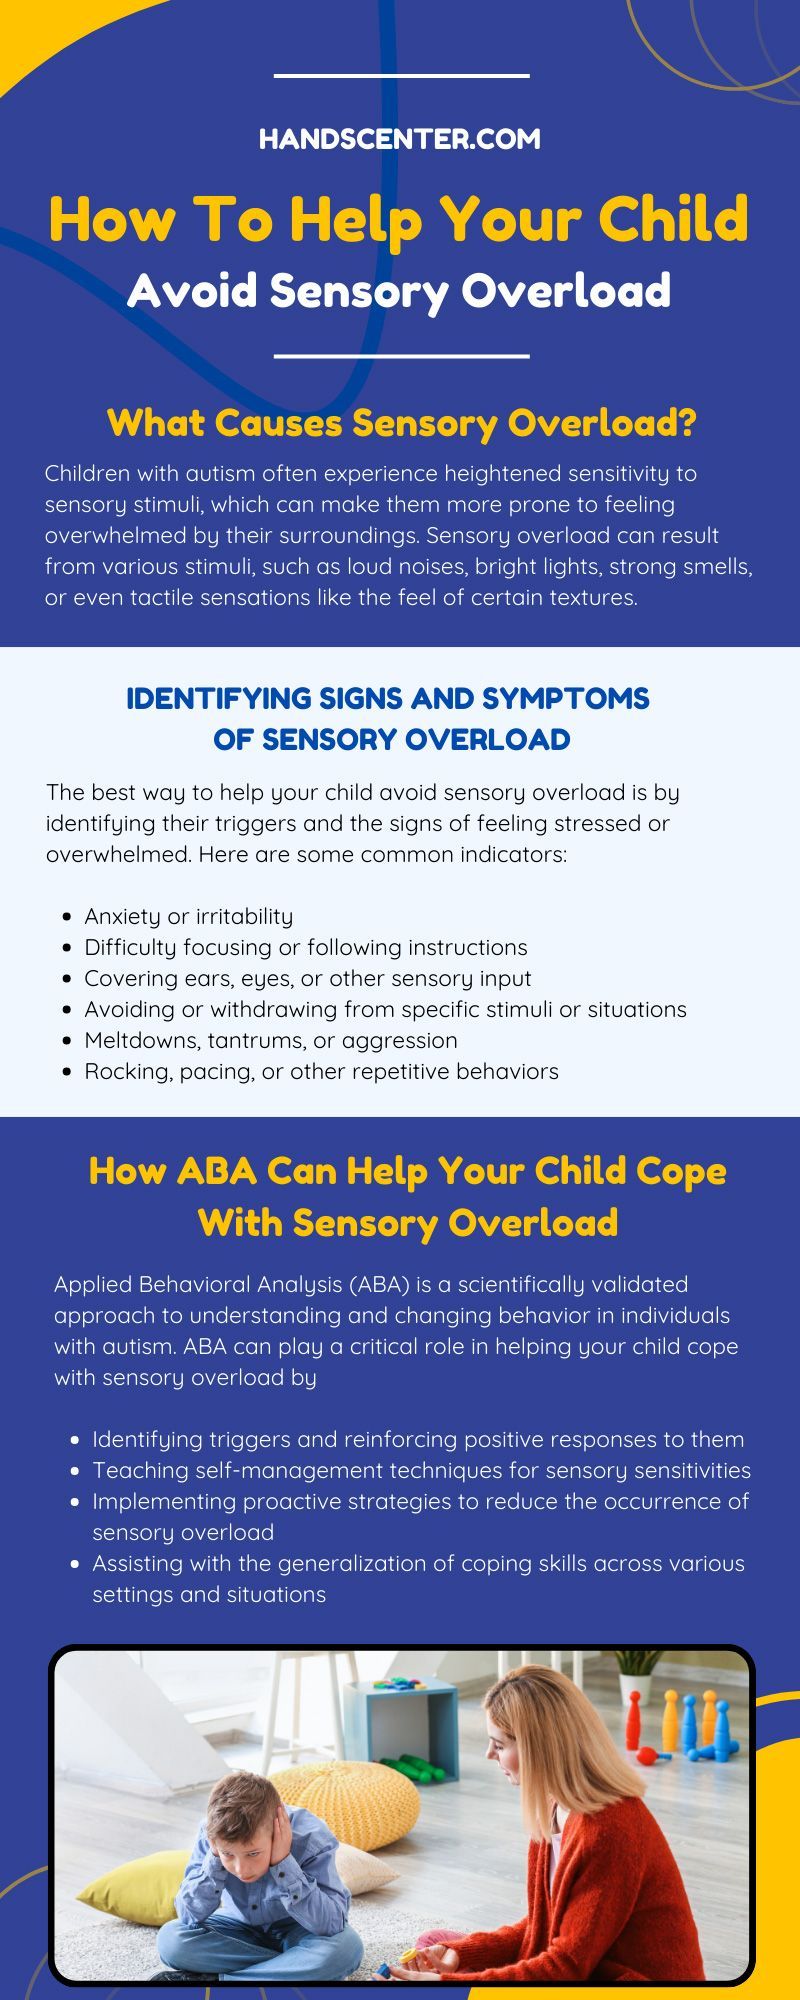 How To Help Your Child Avoid Sensory Overload
